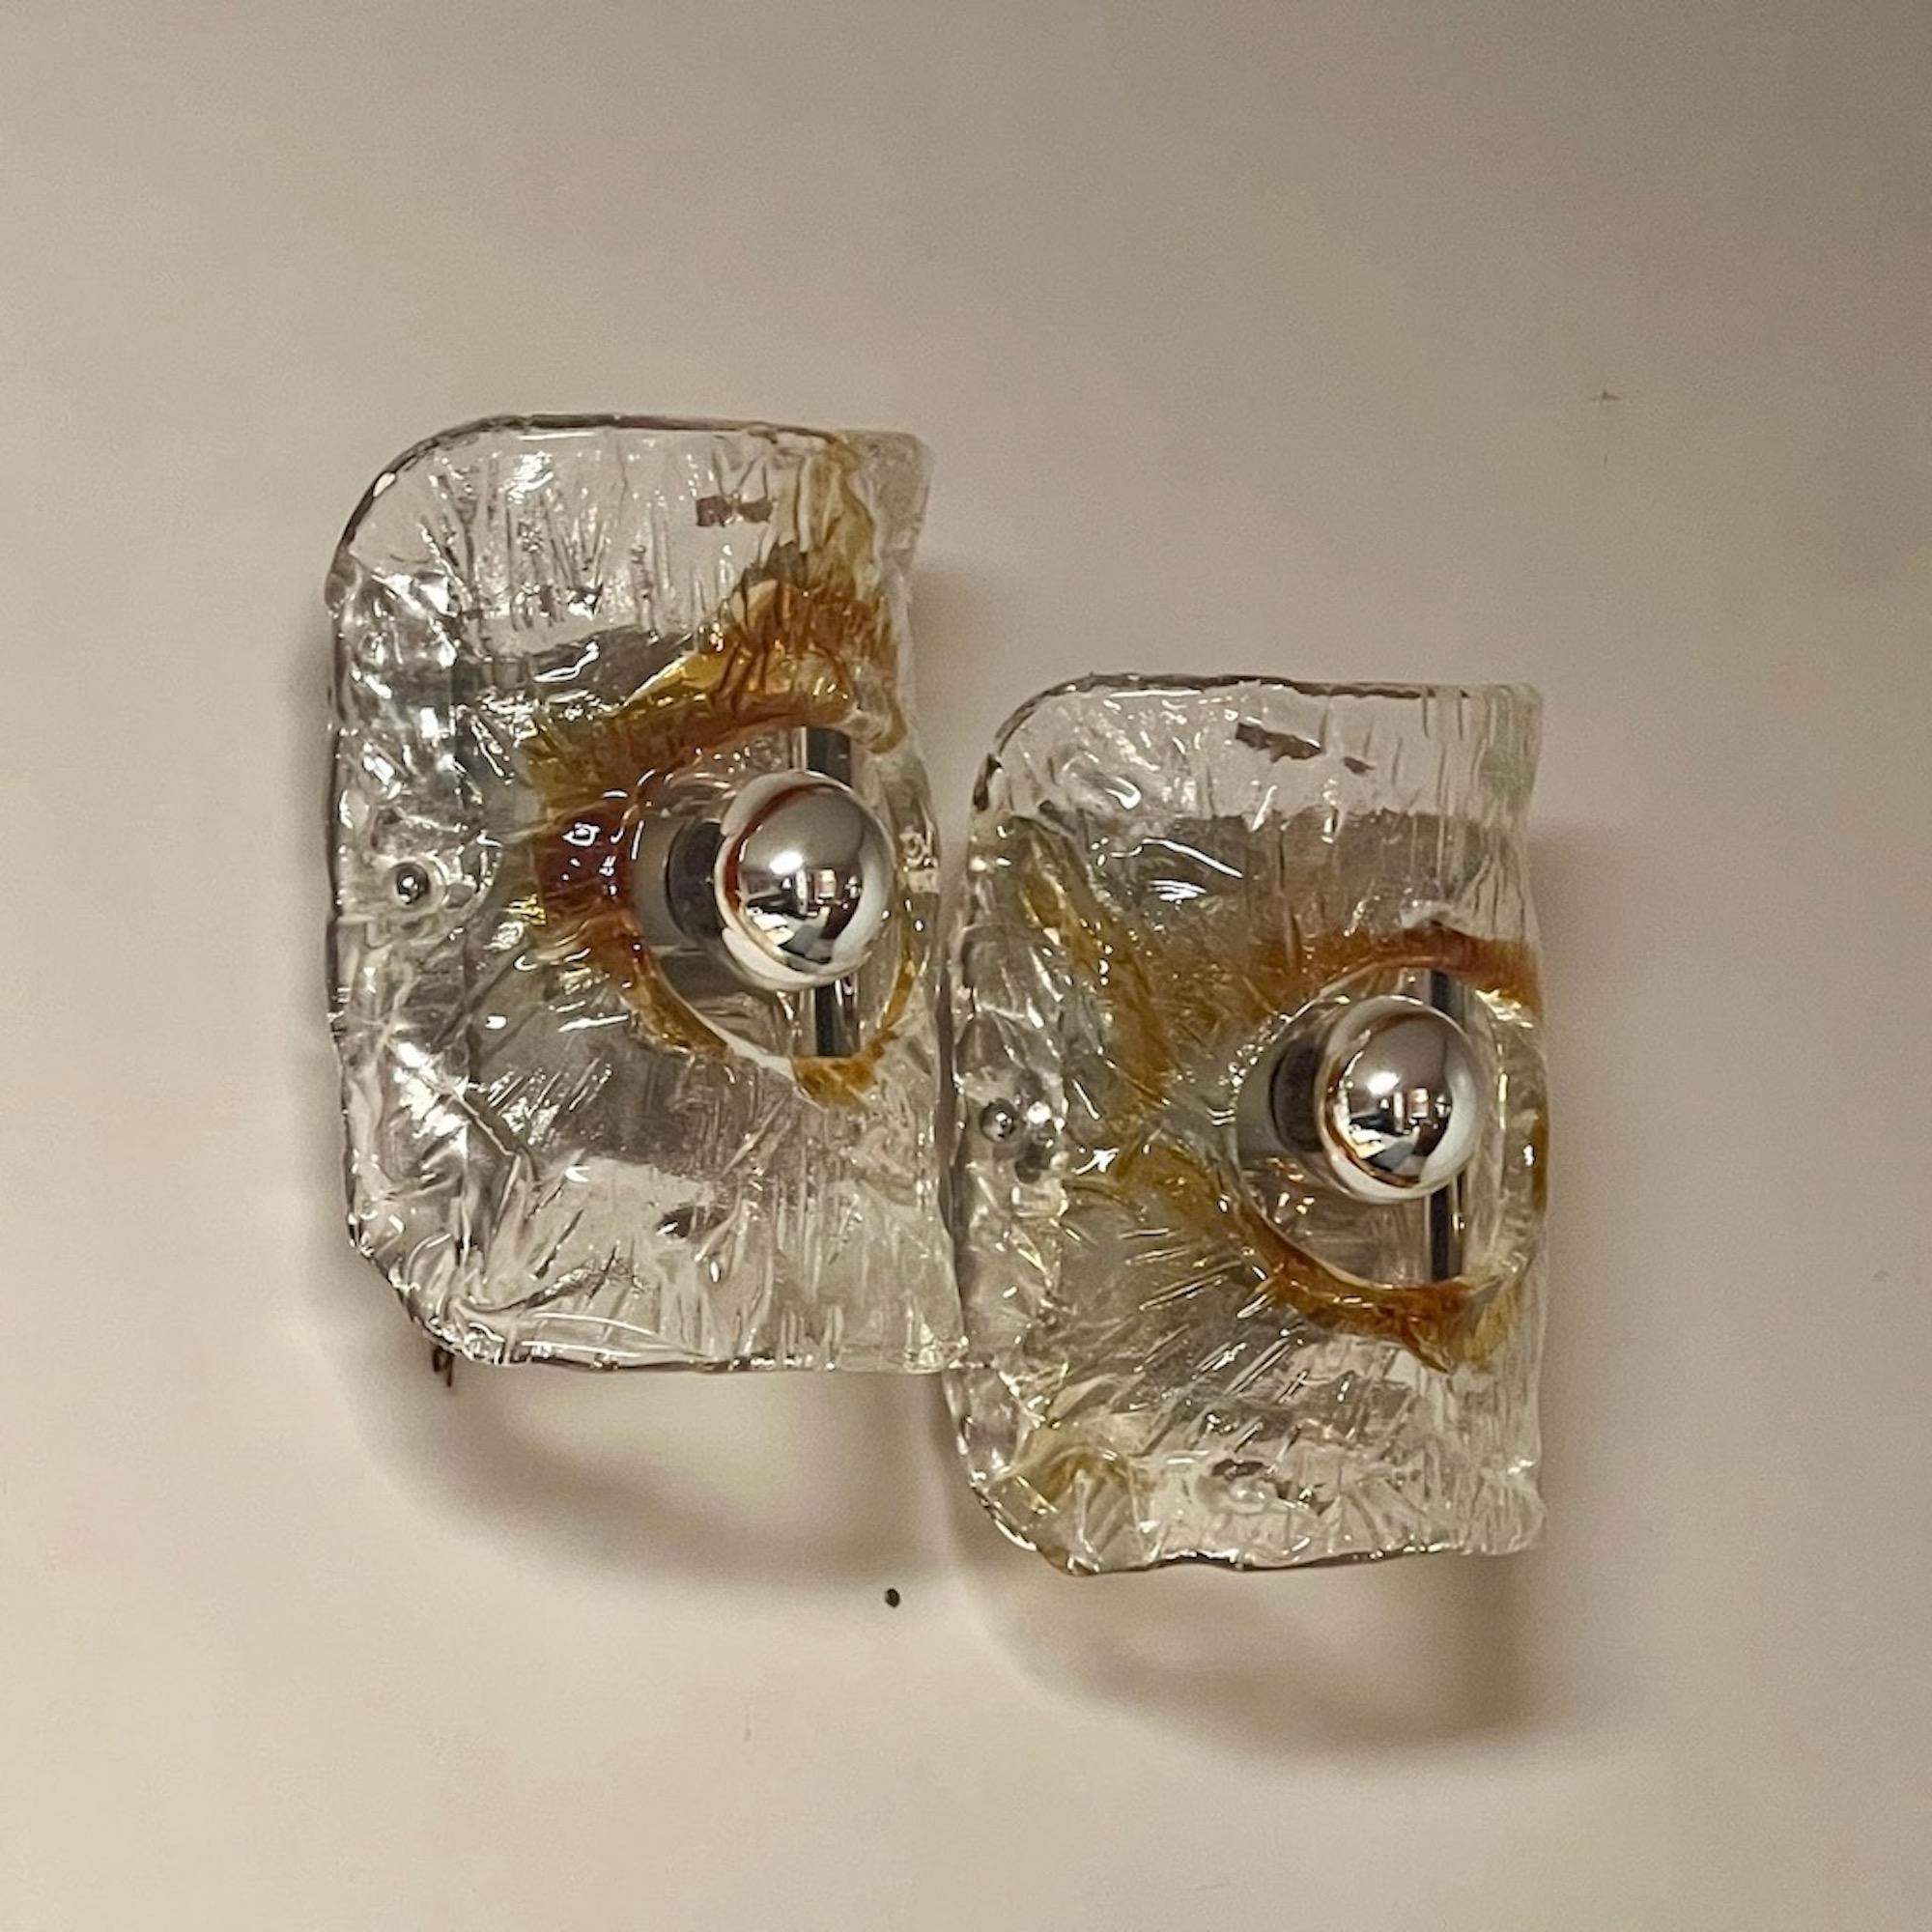 Late 20th Century Murano Glass Vintage 70s Artisanal Lamps - Frosted Glass Amber Hues - Set of 2